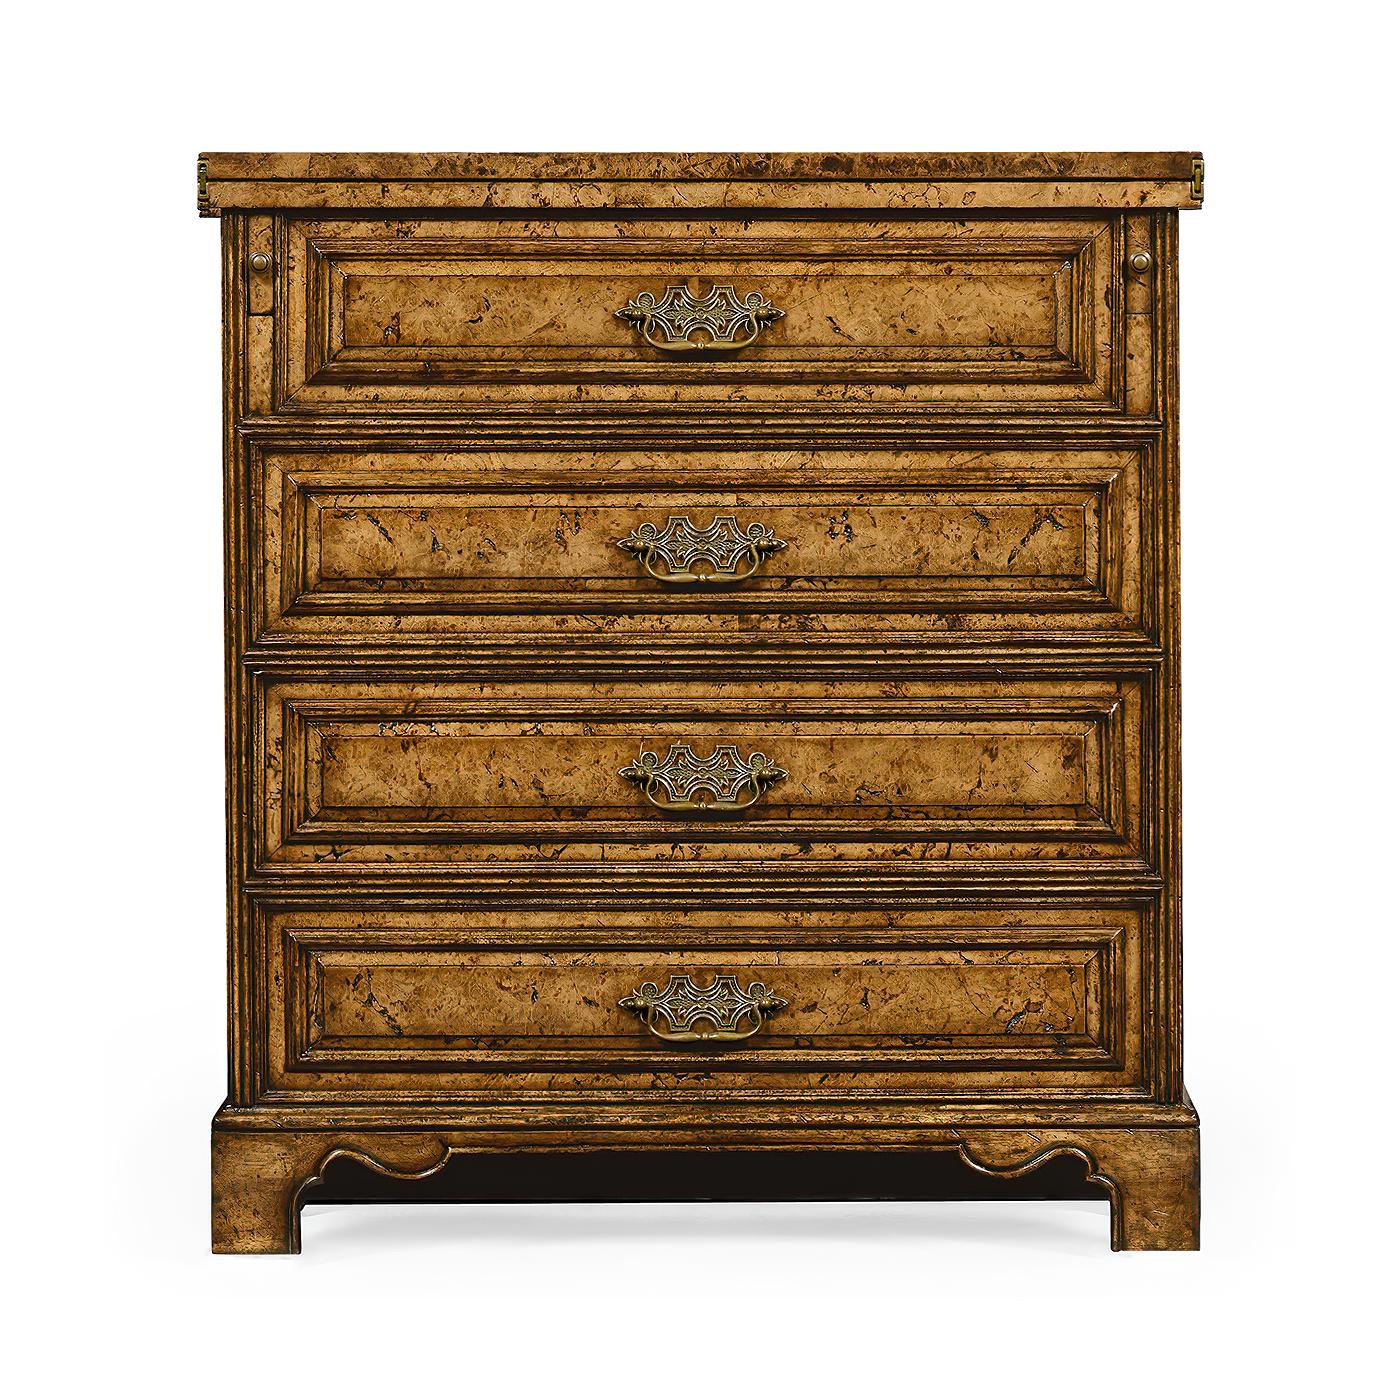 Queen Anne style burr oak four drawer chest of drawers in burl veneer of small proportions, the top with a hinged dressing surface inset with leather panels which rests on pull-out slides. Patinated brass handles and plates.

Dimensions: 29